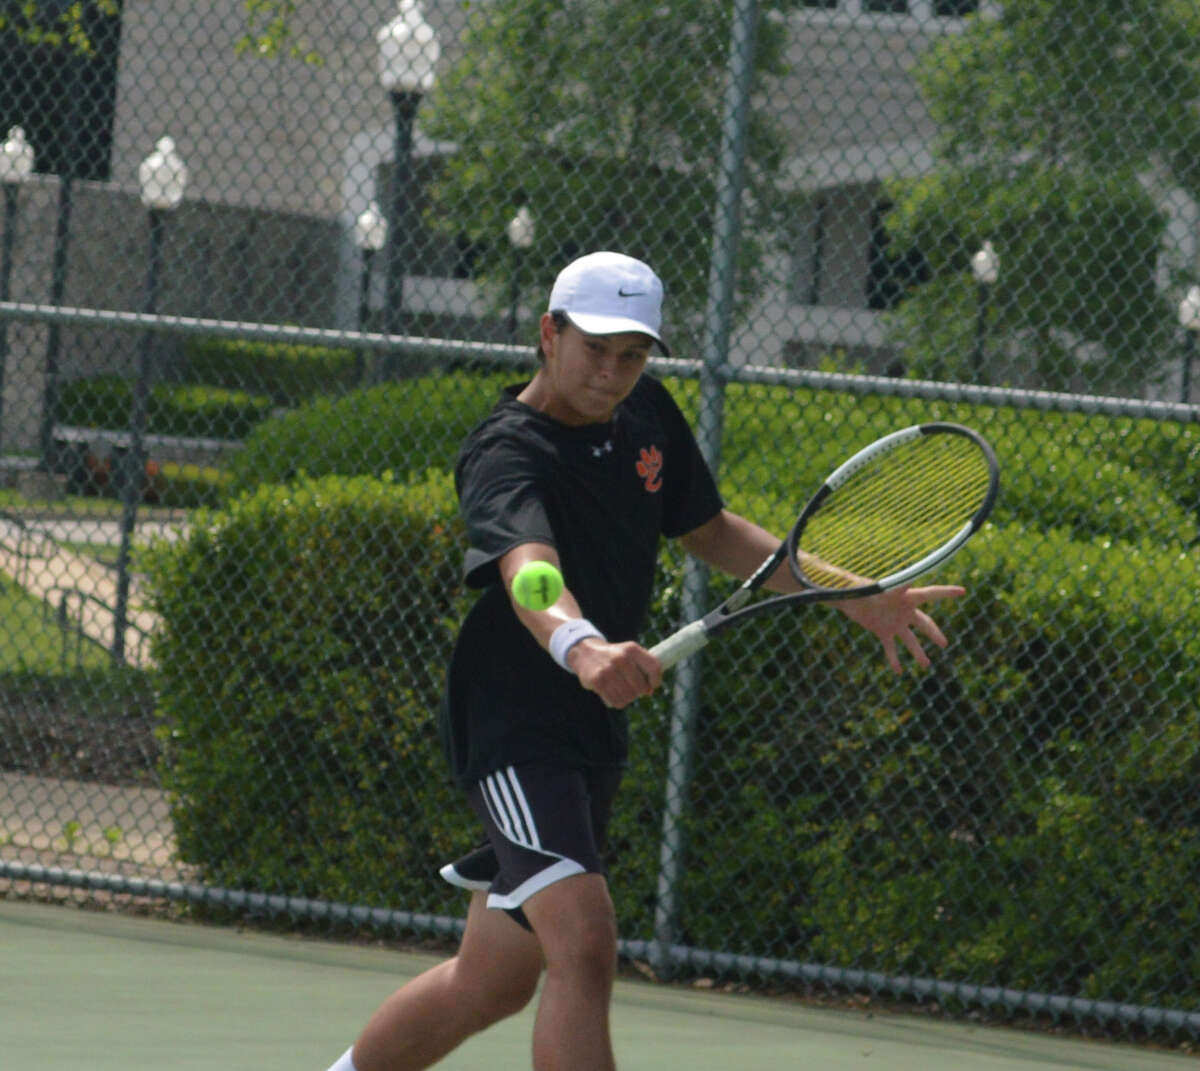 Jesse Hattrup at the Southwestern Conference tournament on Saturday at the Andy Simpson Tennis Complex on the campus of Lewis and Clark Community College.